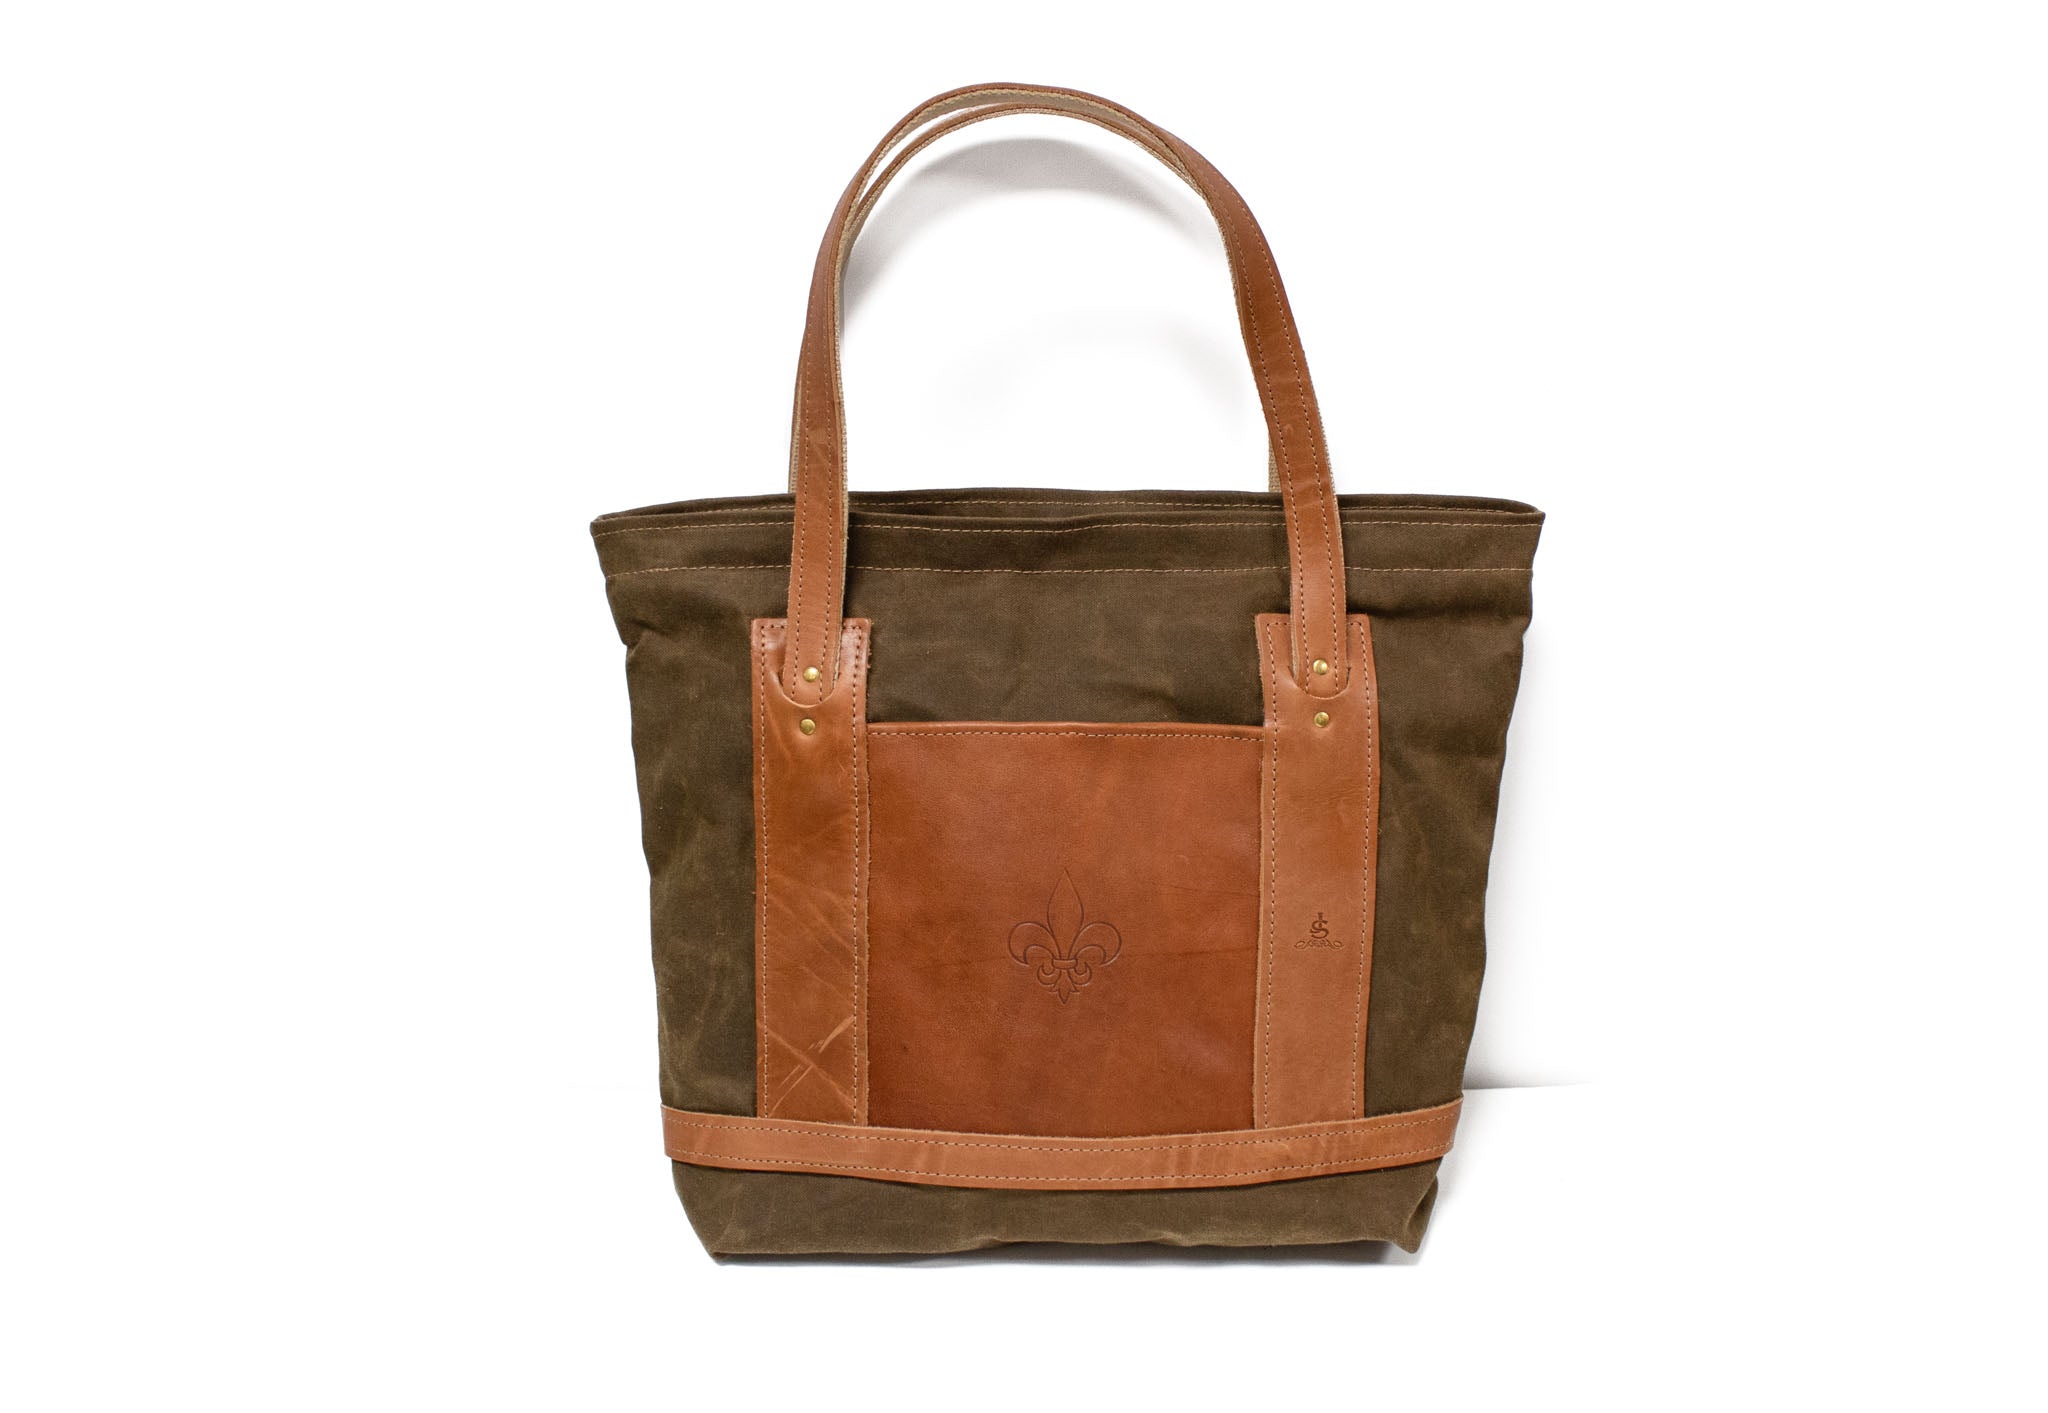 Tote Bag - Bourbon Wax Cotton Duck Canvas with Natural Leather Trim ...